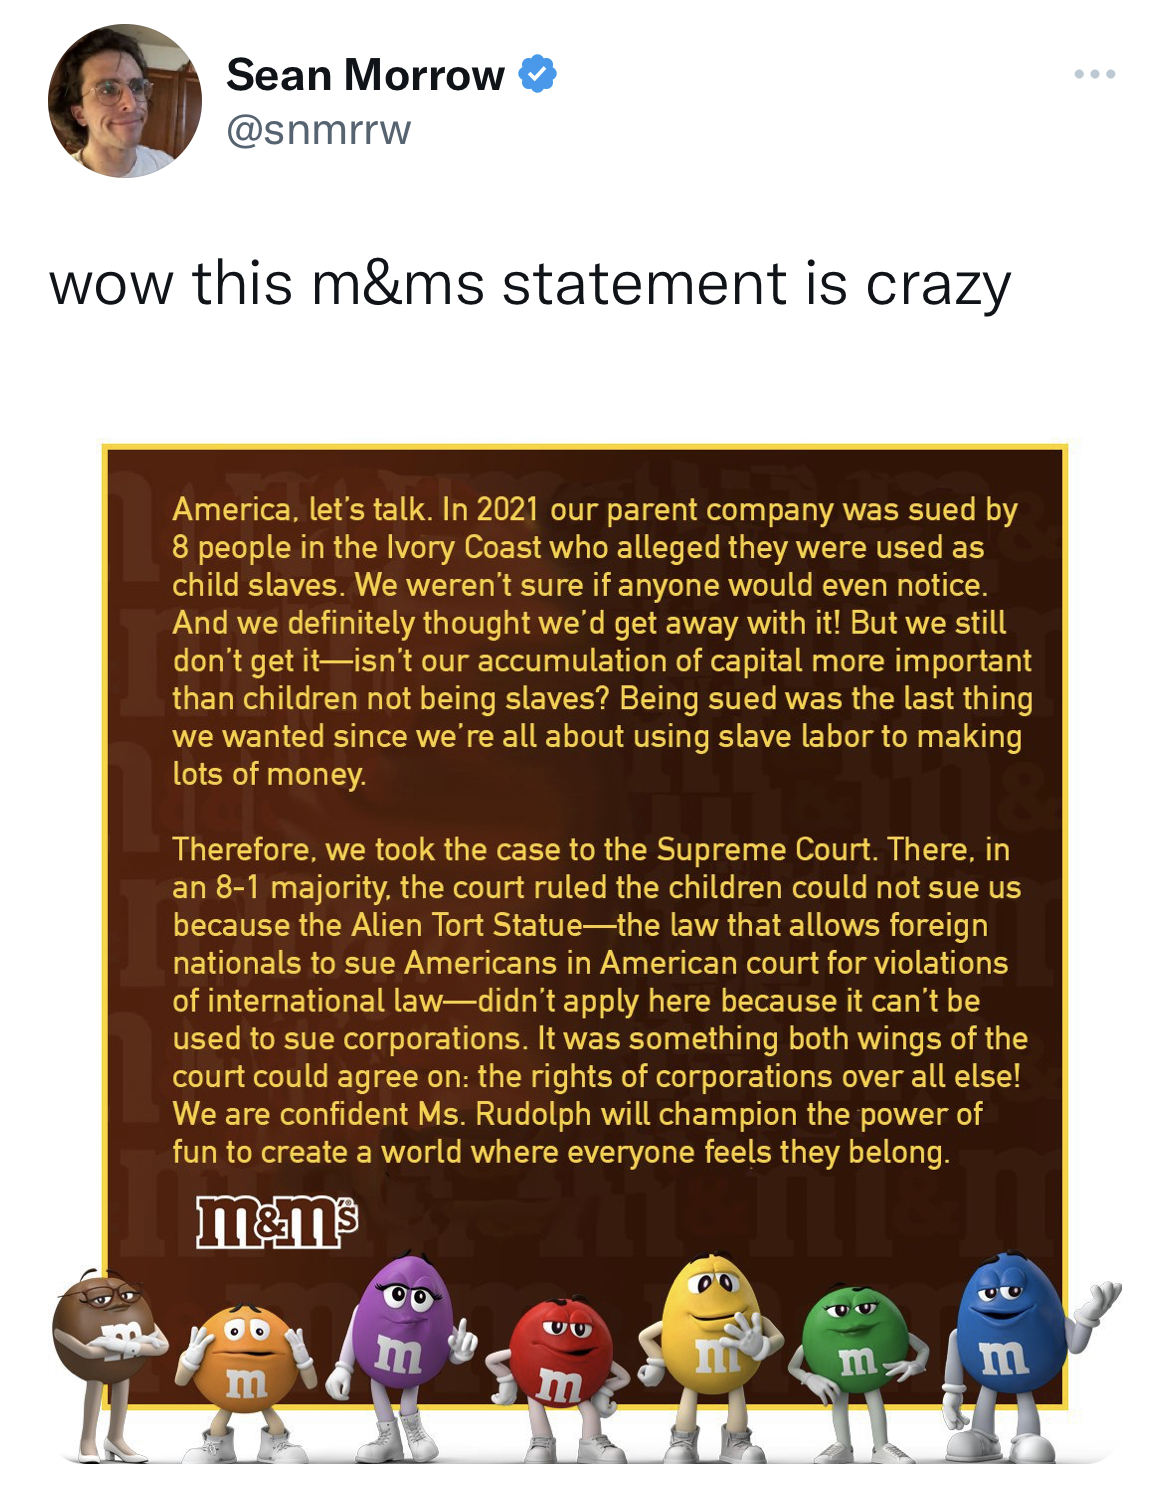 M&M's message spoofs - lots of writing - Sean Morrow wow this m&ms statement is crazy America, let's talk. In 2021 our parent company was sued by 8 people in the Ivory Coast who alleged they were used as child slaves. We weren't sure if anyone would even 